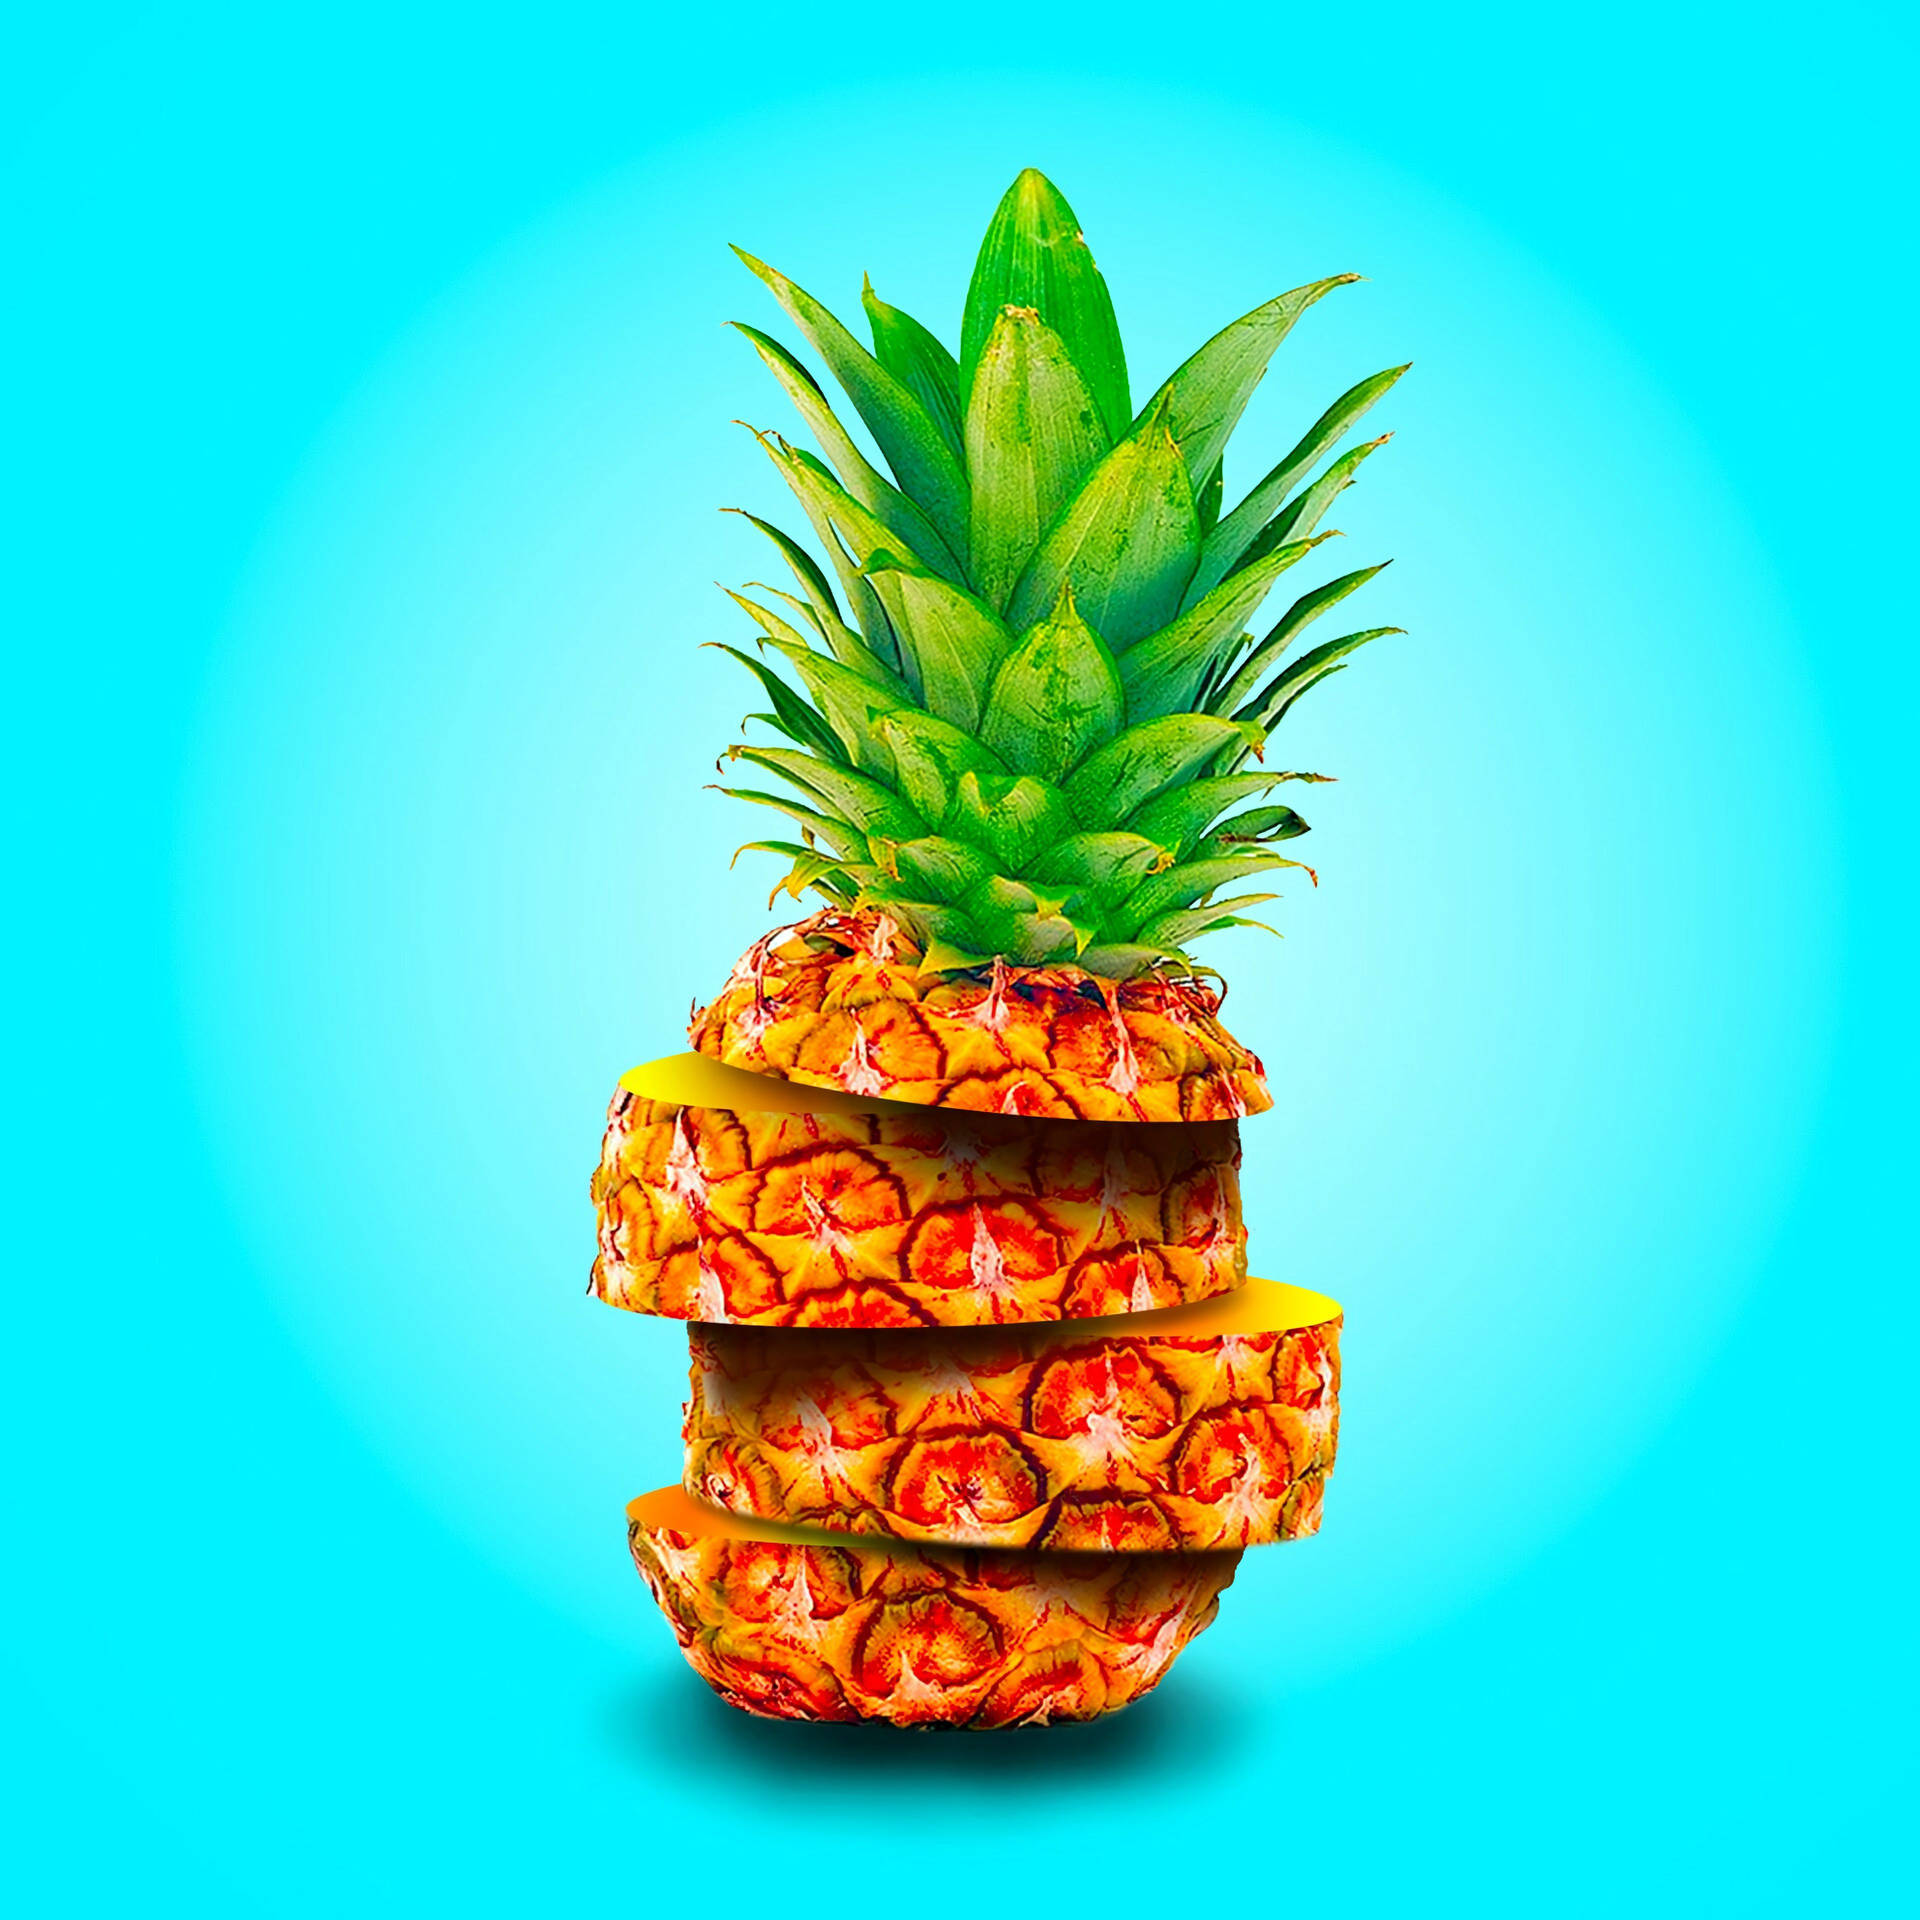 Pineapple Wallpaper Images